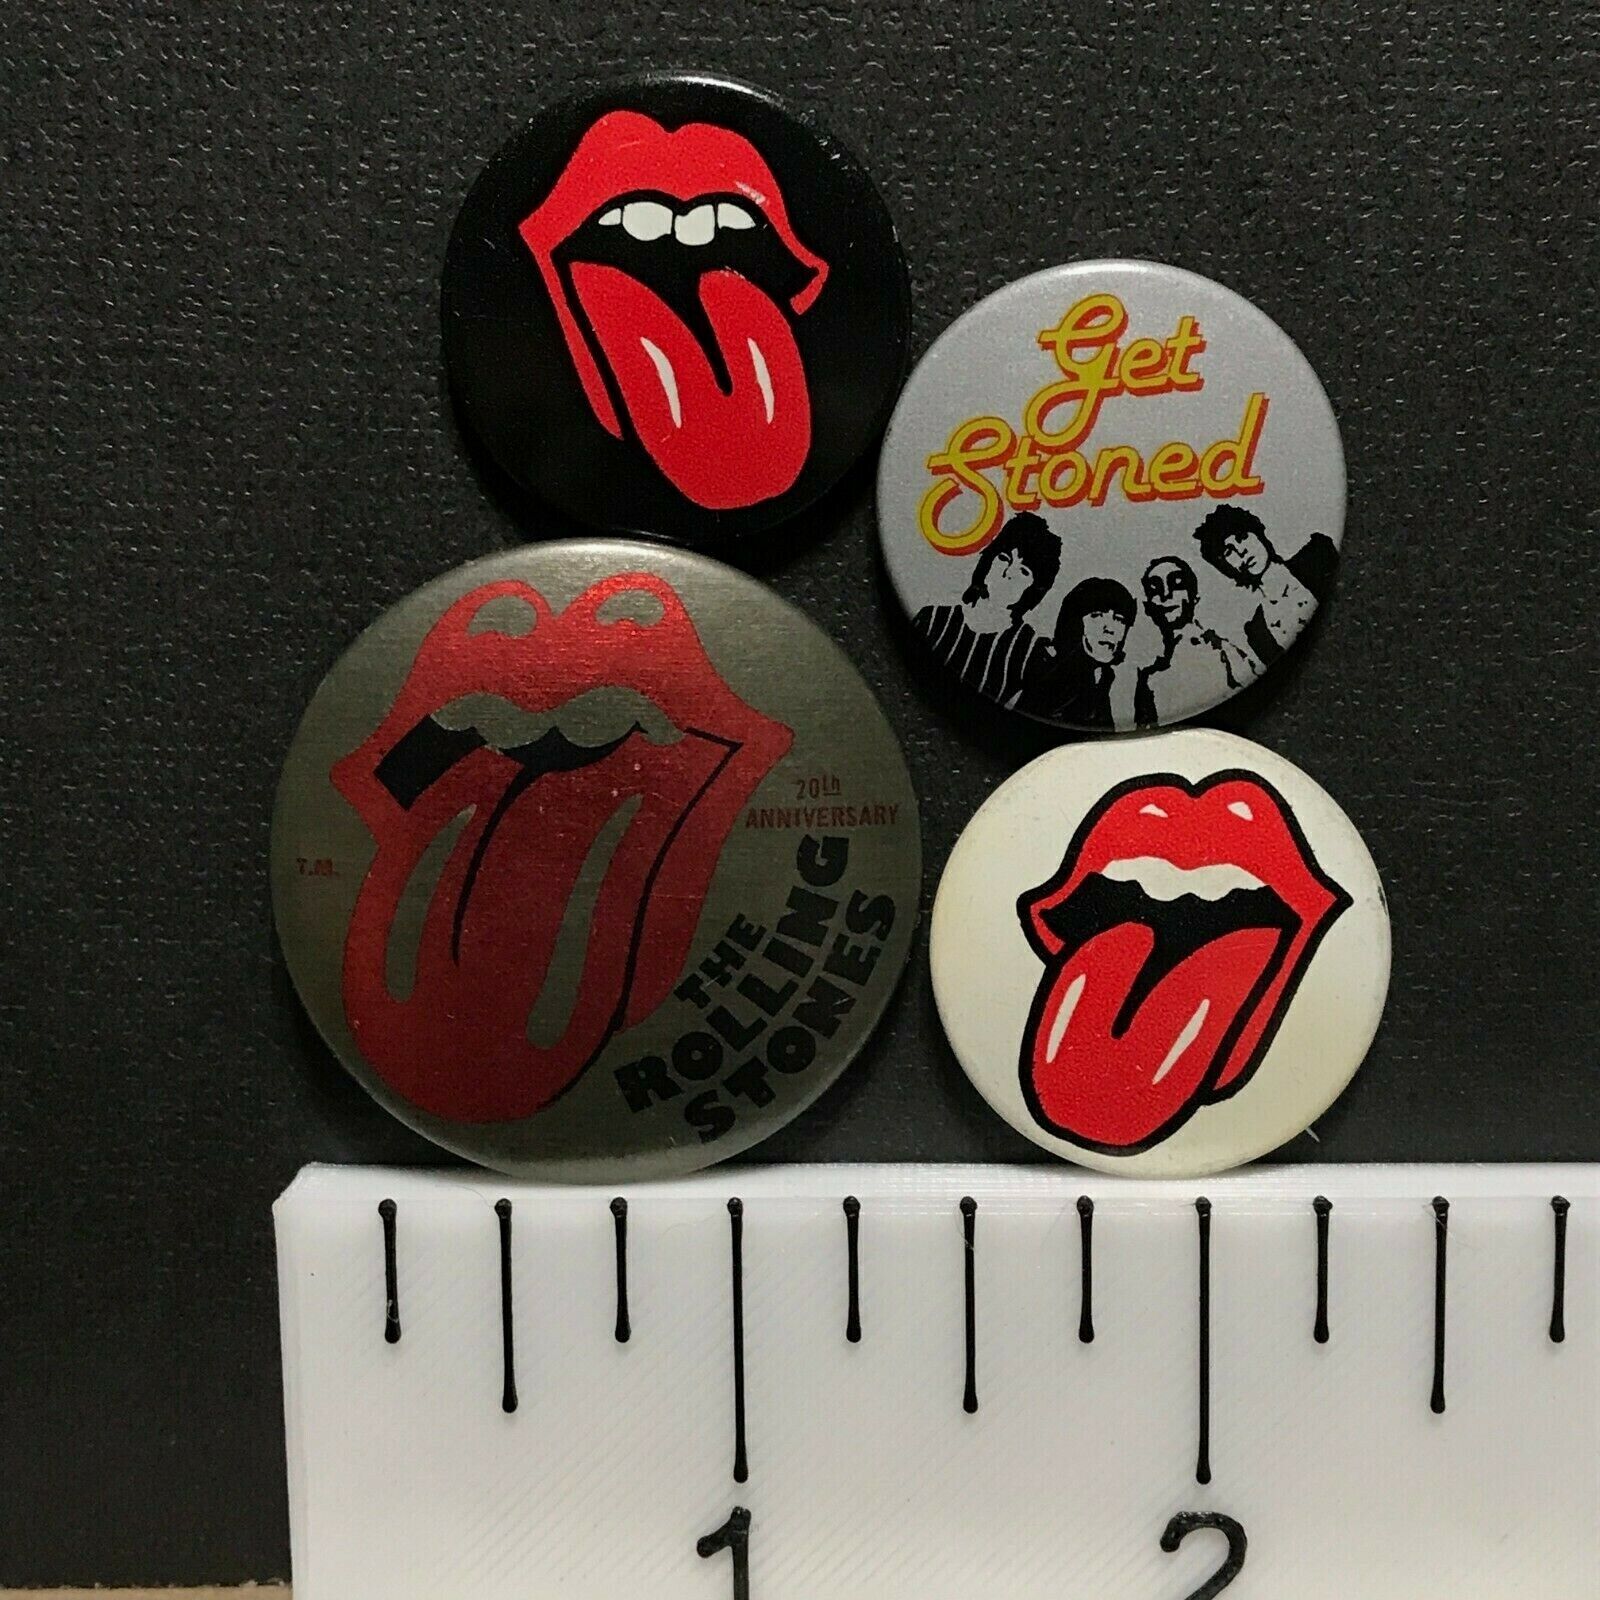 Rolling Stones, Set of 4 (1980s?) Vintage Rock Music Pin-Back Buttons Jagger